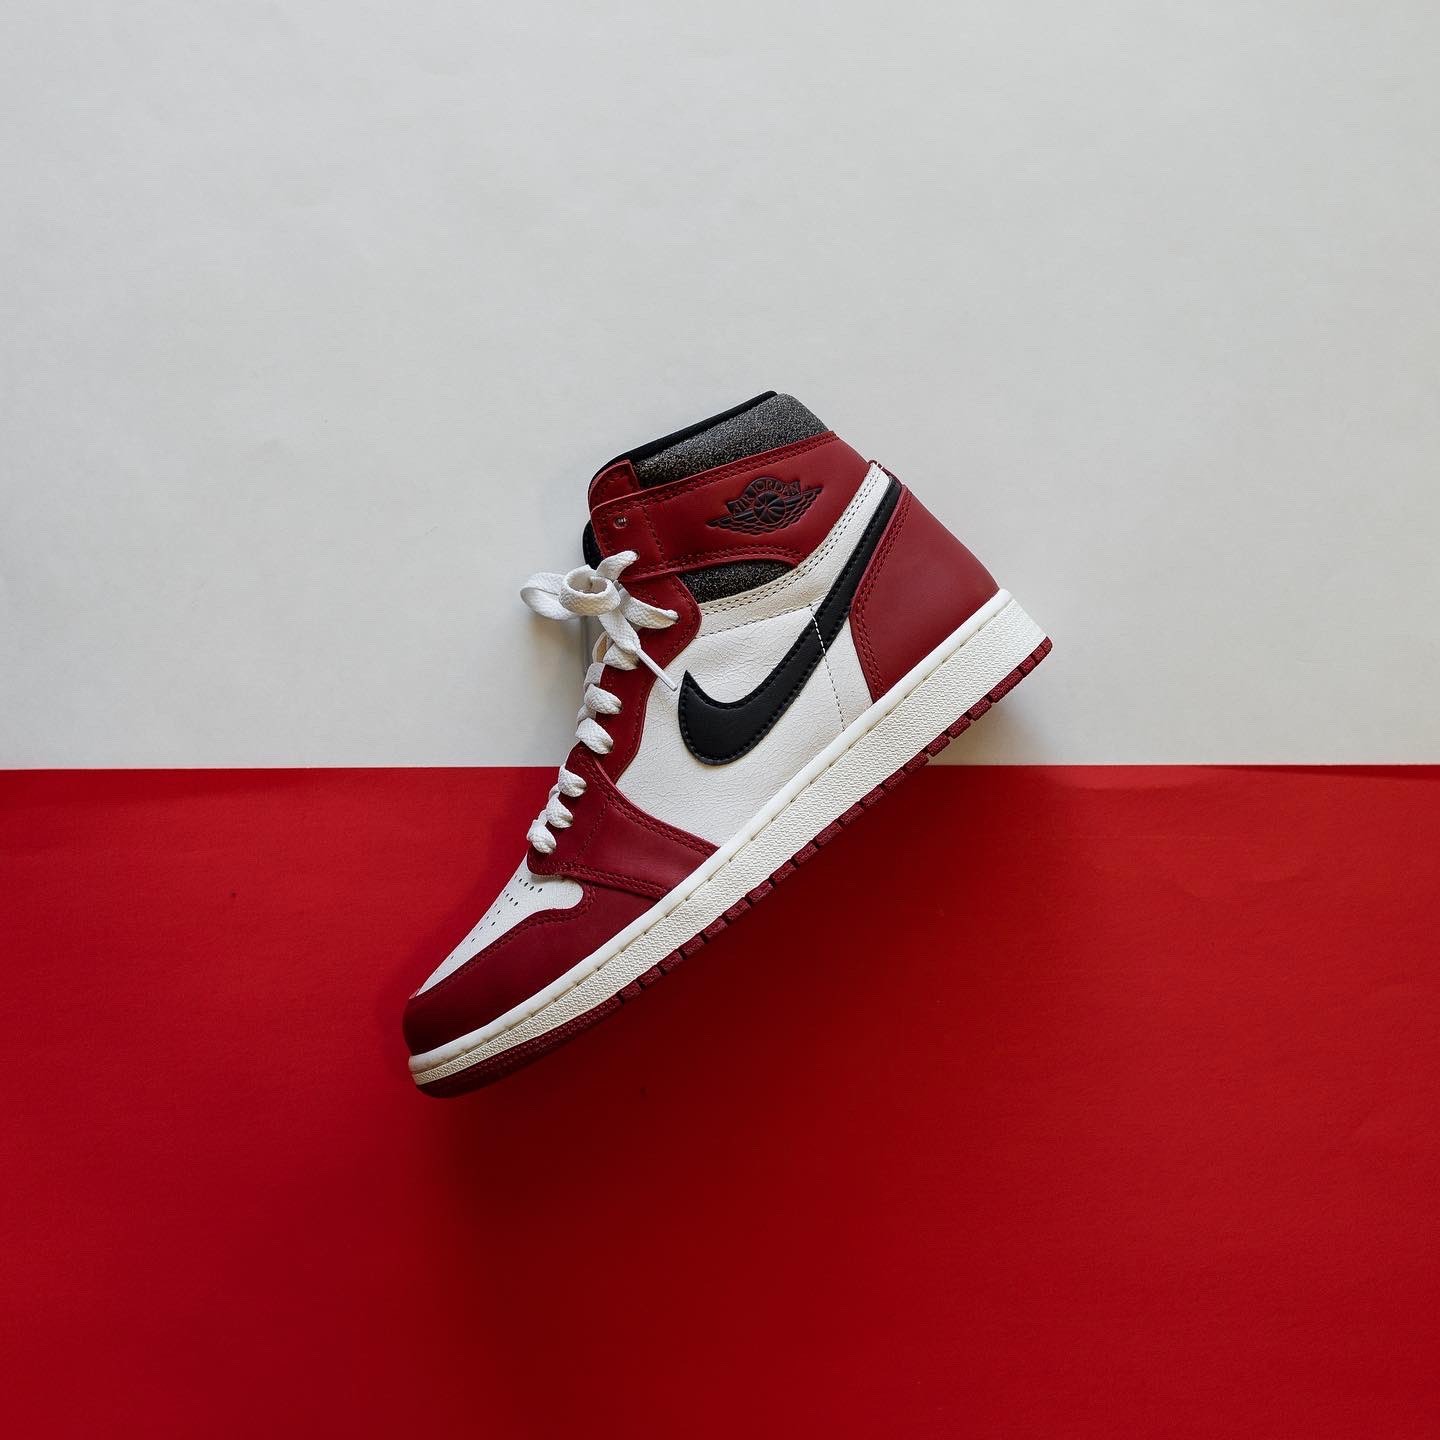 SiteSupply on Twitter: "The Air Jordan 1 Chicago drops 11/19 ✨ 🌎 Release Links and Raffles -&gt; https://t.co/2qQR3N4B0d @champssports https://t.co/vyUc3HJEjo" /